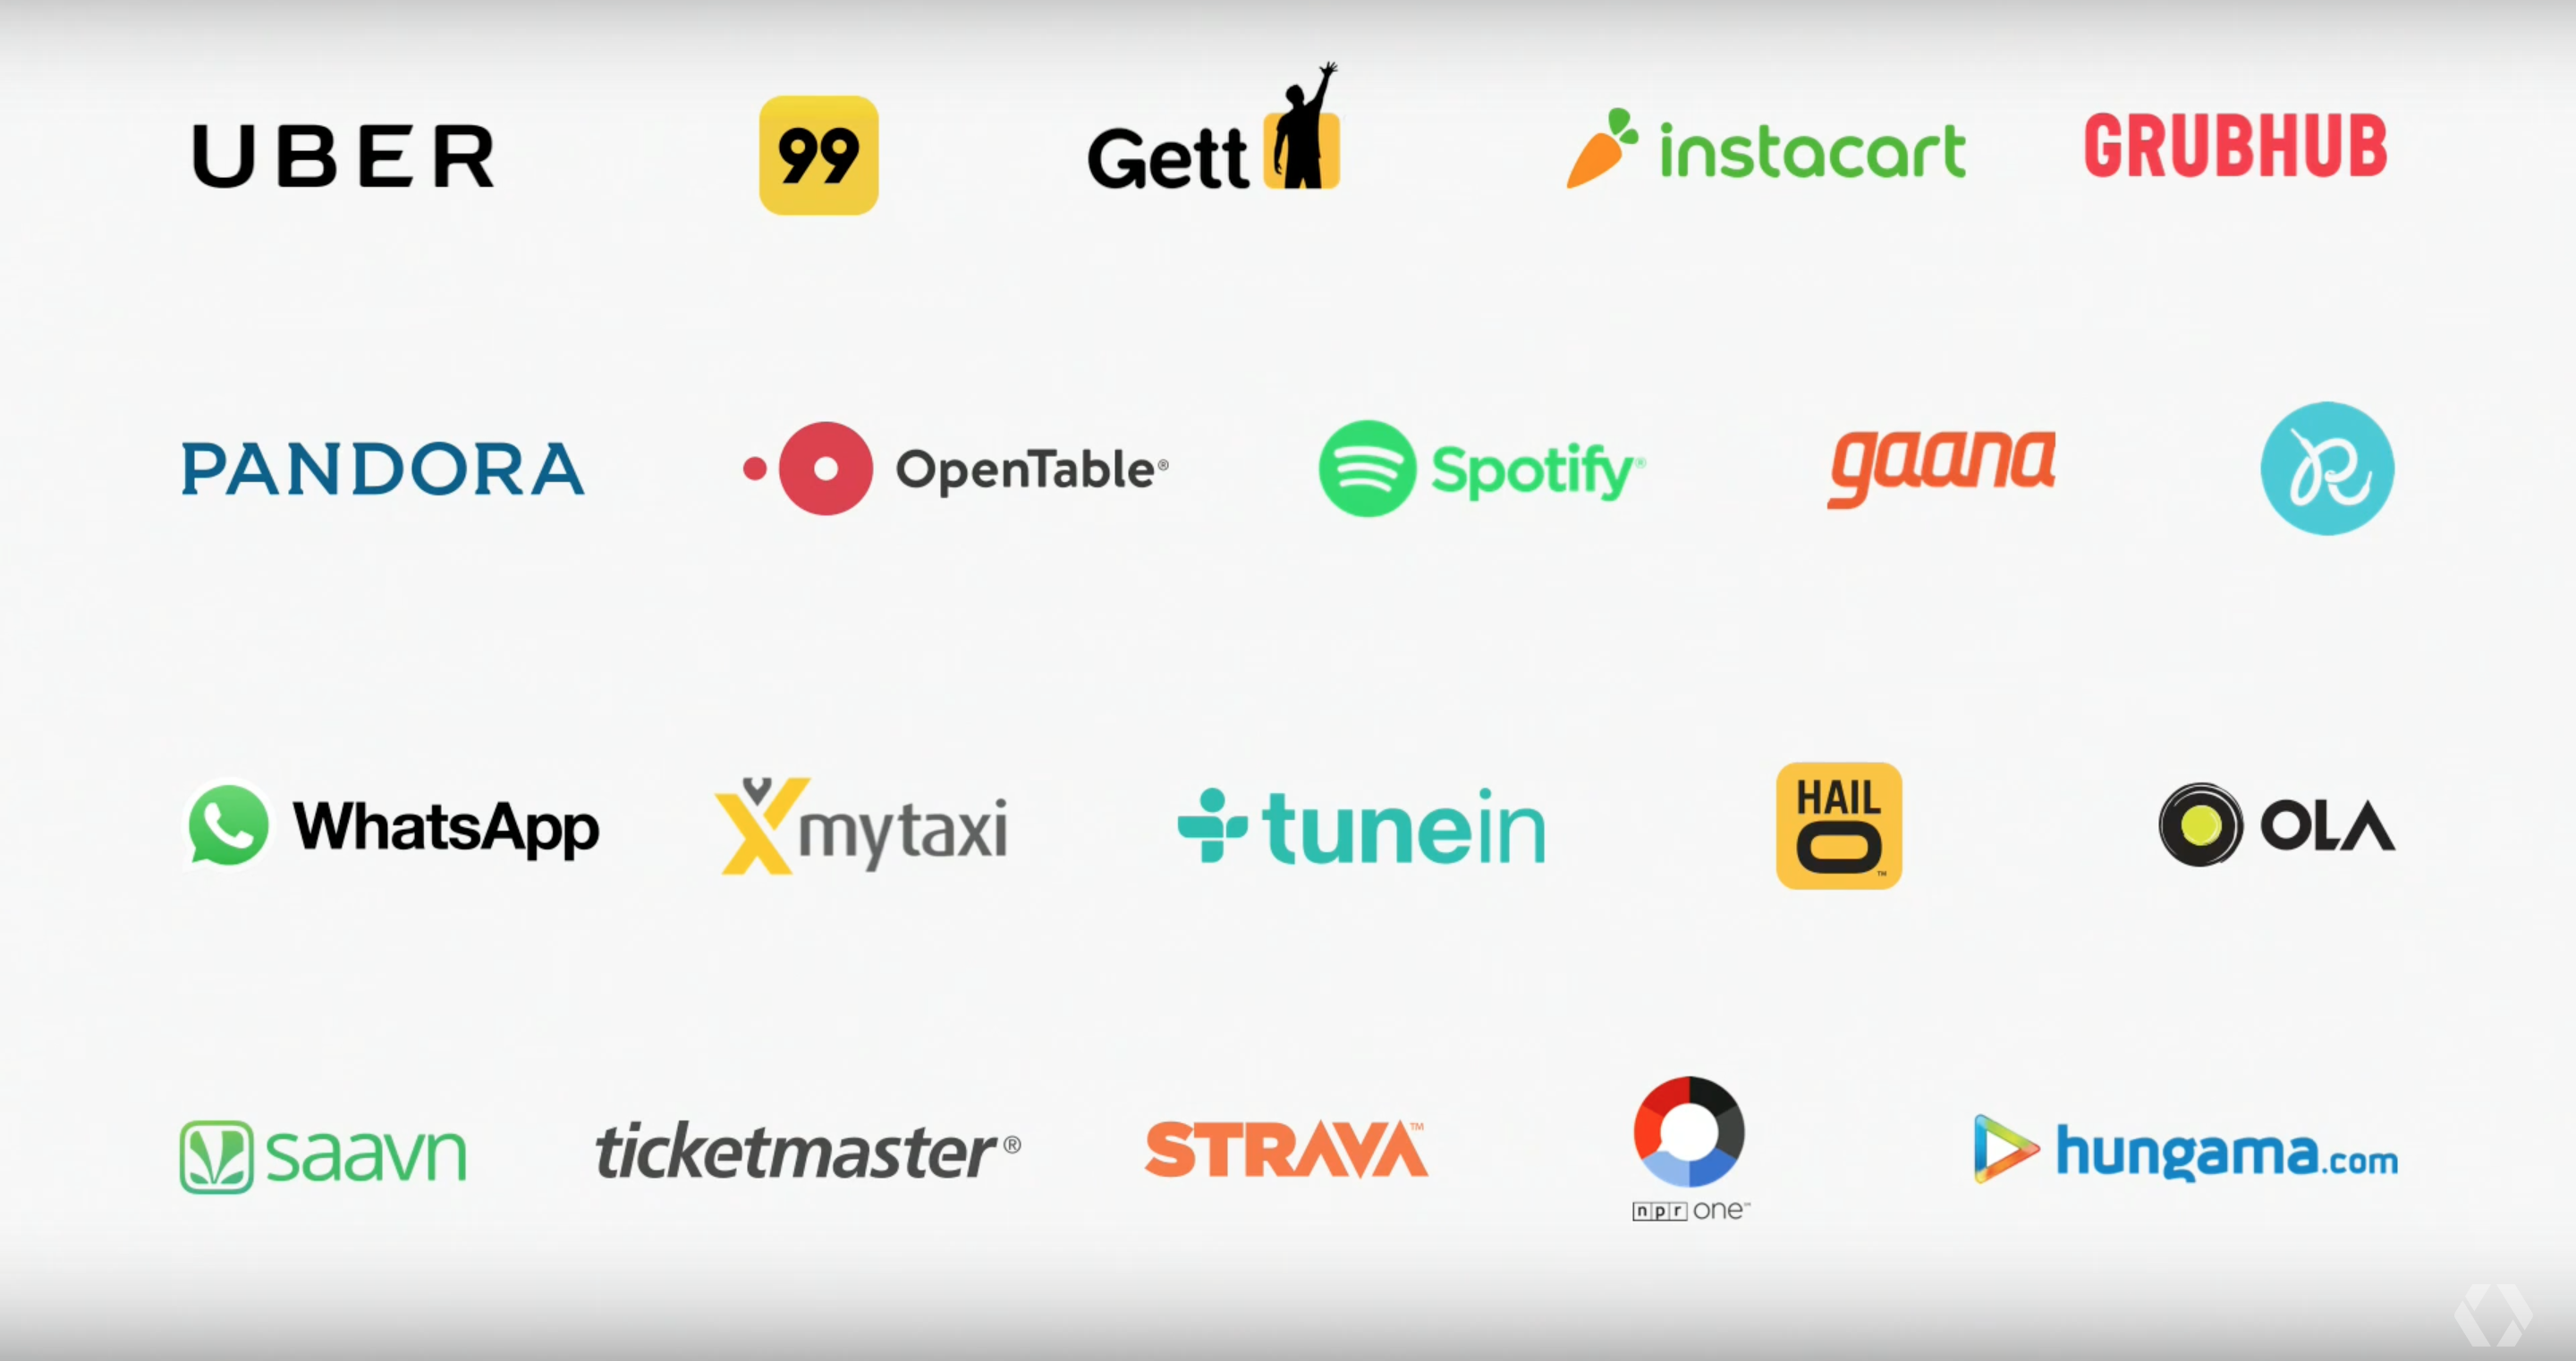 Services that could integrate with the Google Assistant.